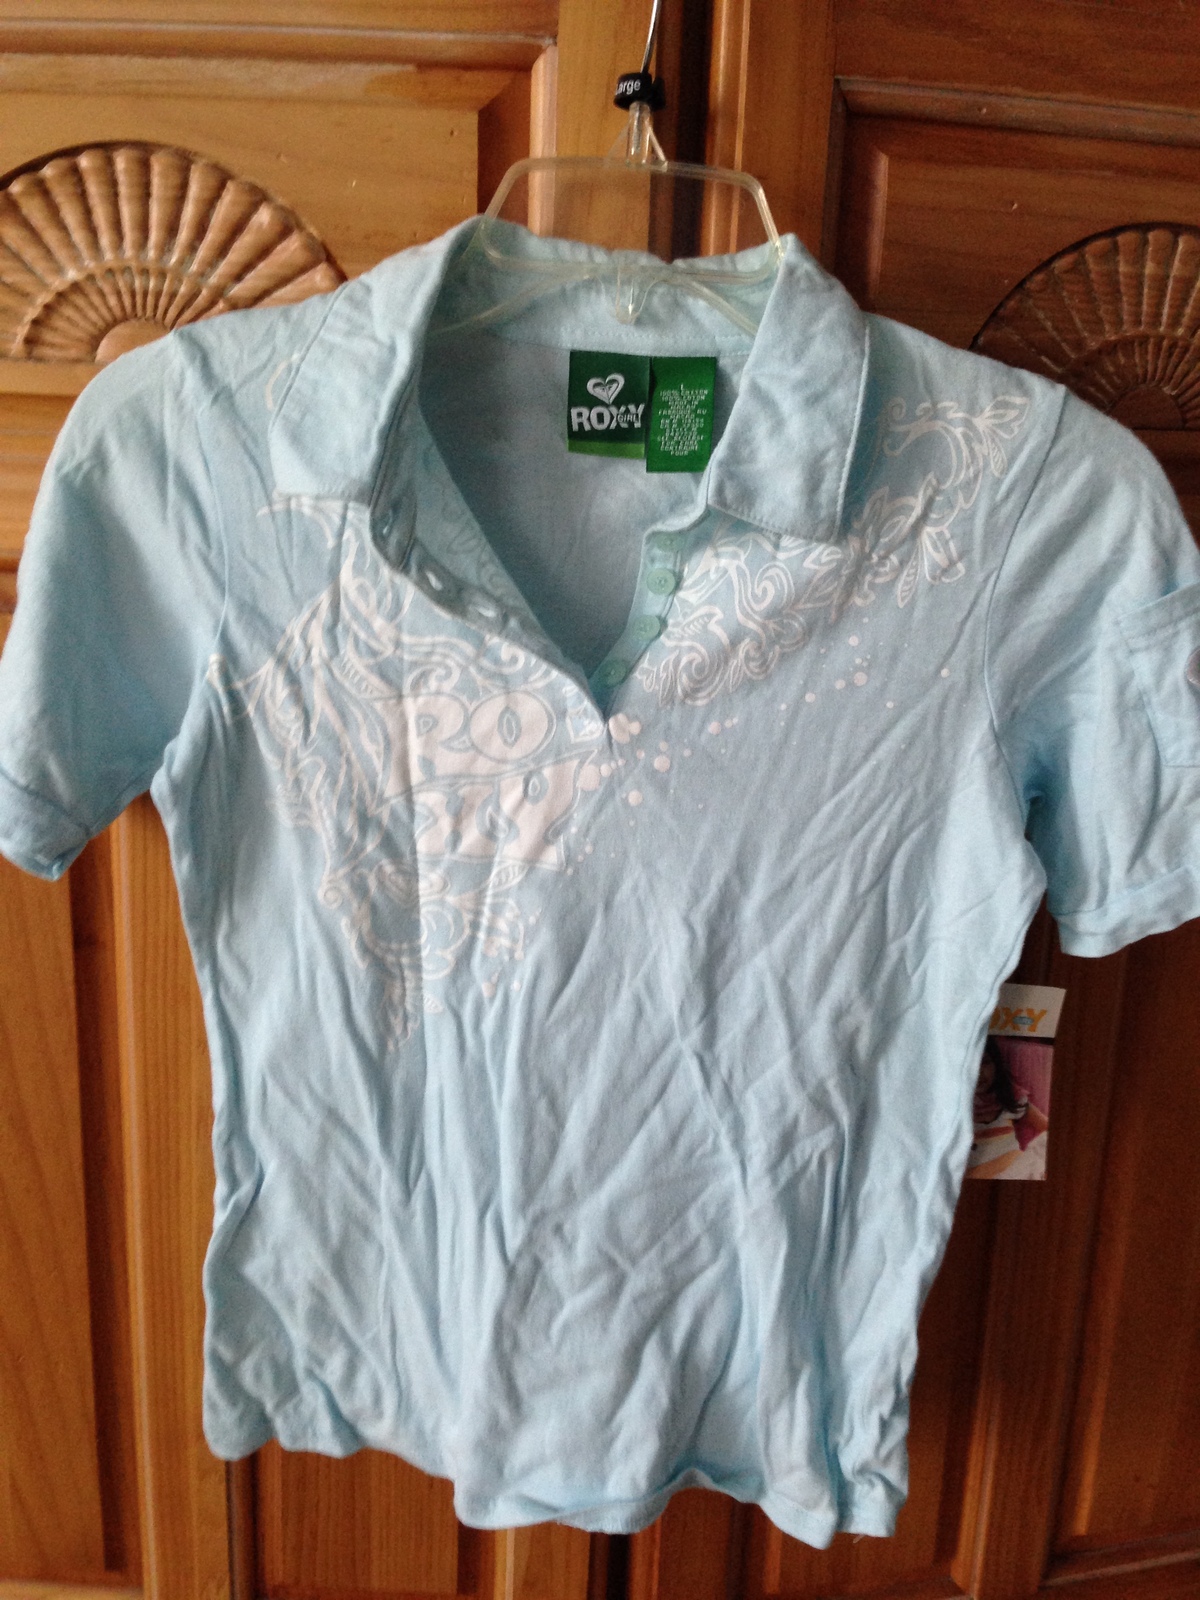 Primary image for roxy girl short sleeve blue print top with small pocket on sleeve size large